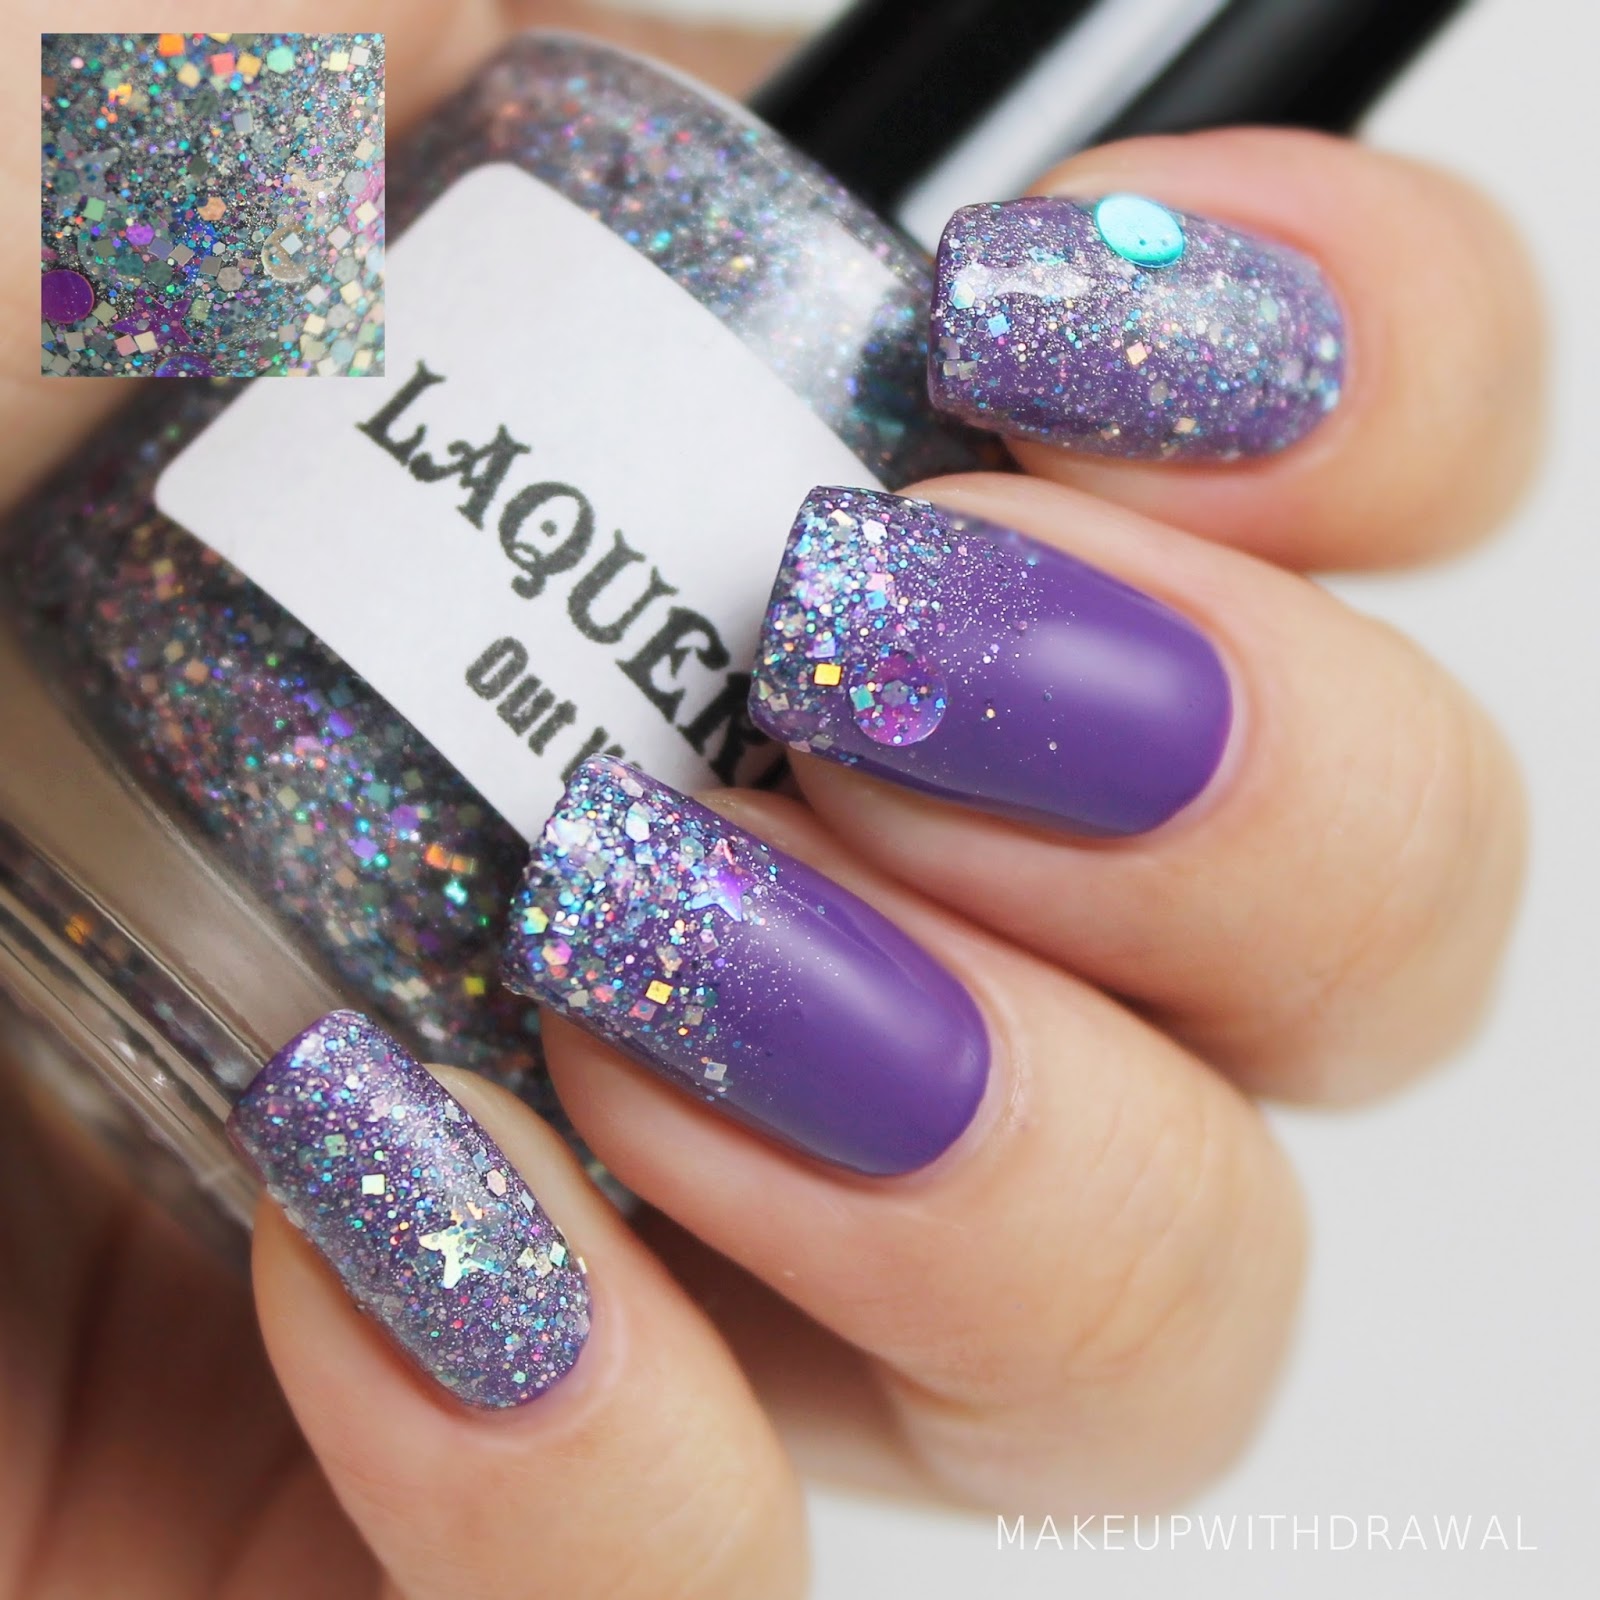 Laquerlicious Christmas & New Year's Collections - Swatches | Makeup ...